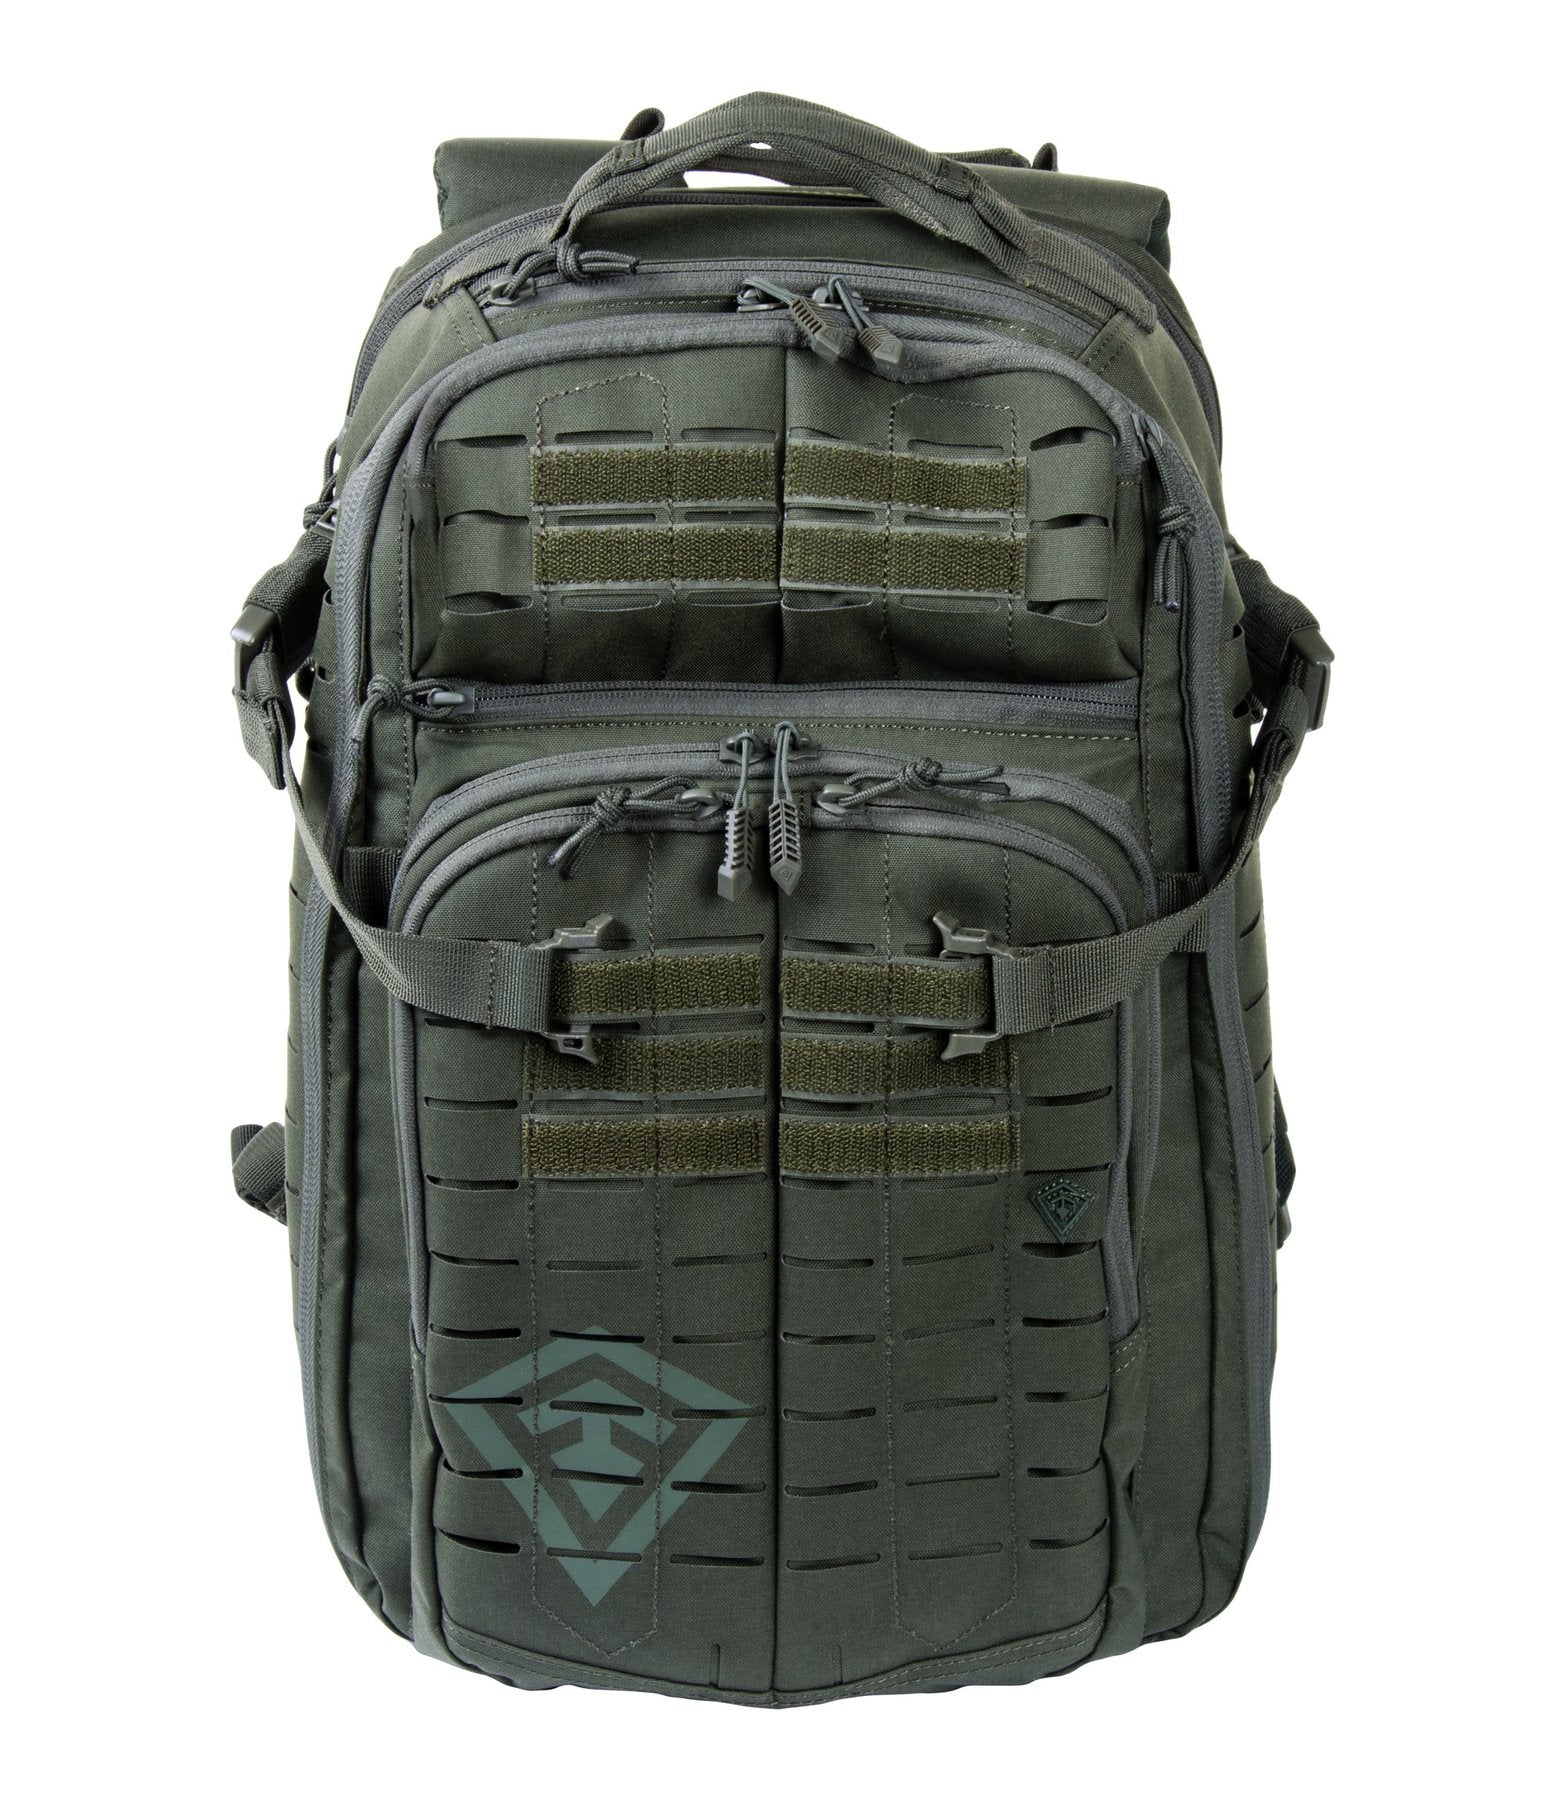 TACTIX Half-Day Plus Backpack (180036) Black, Coyote, OD Green